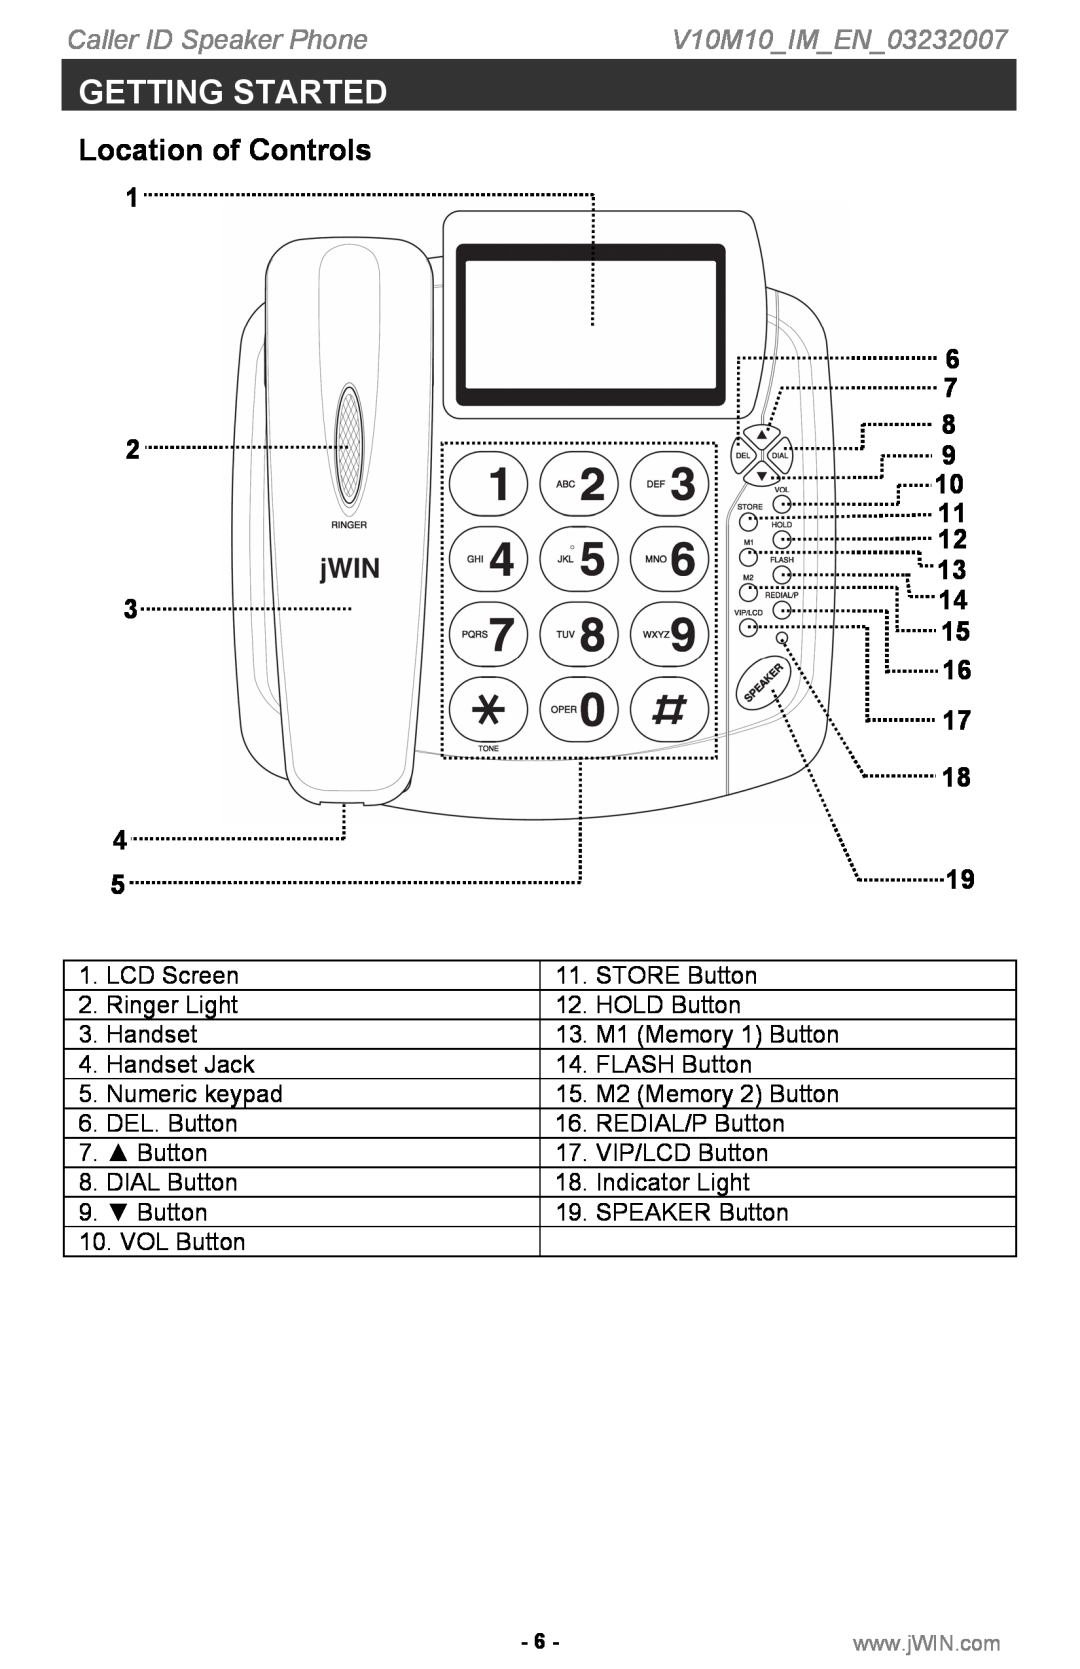 Jwin P531 instruction manual Location of Controls, Getting Started, Caller ID Speaker Phone, V10M10IMEN03232007 